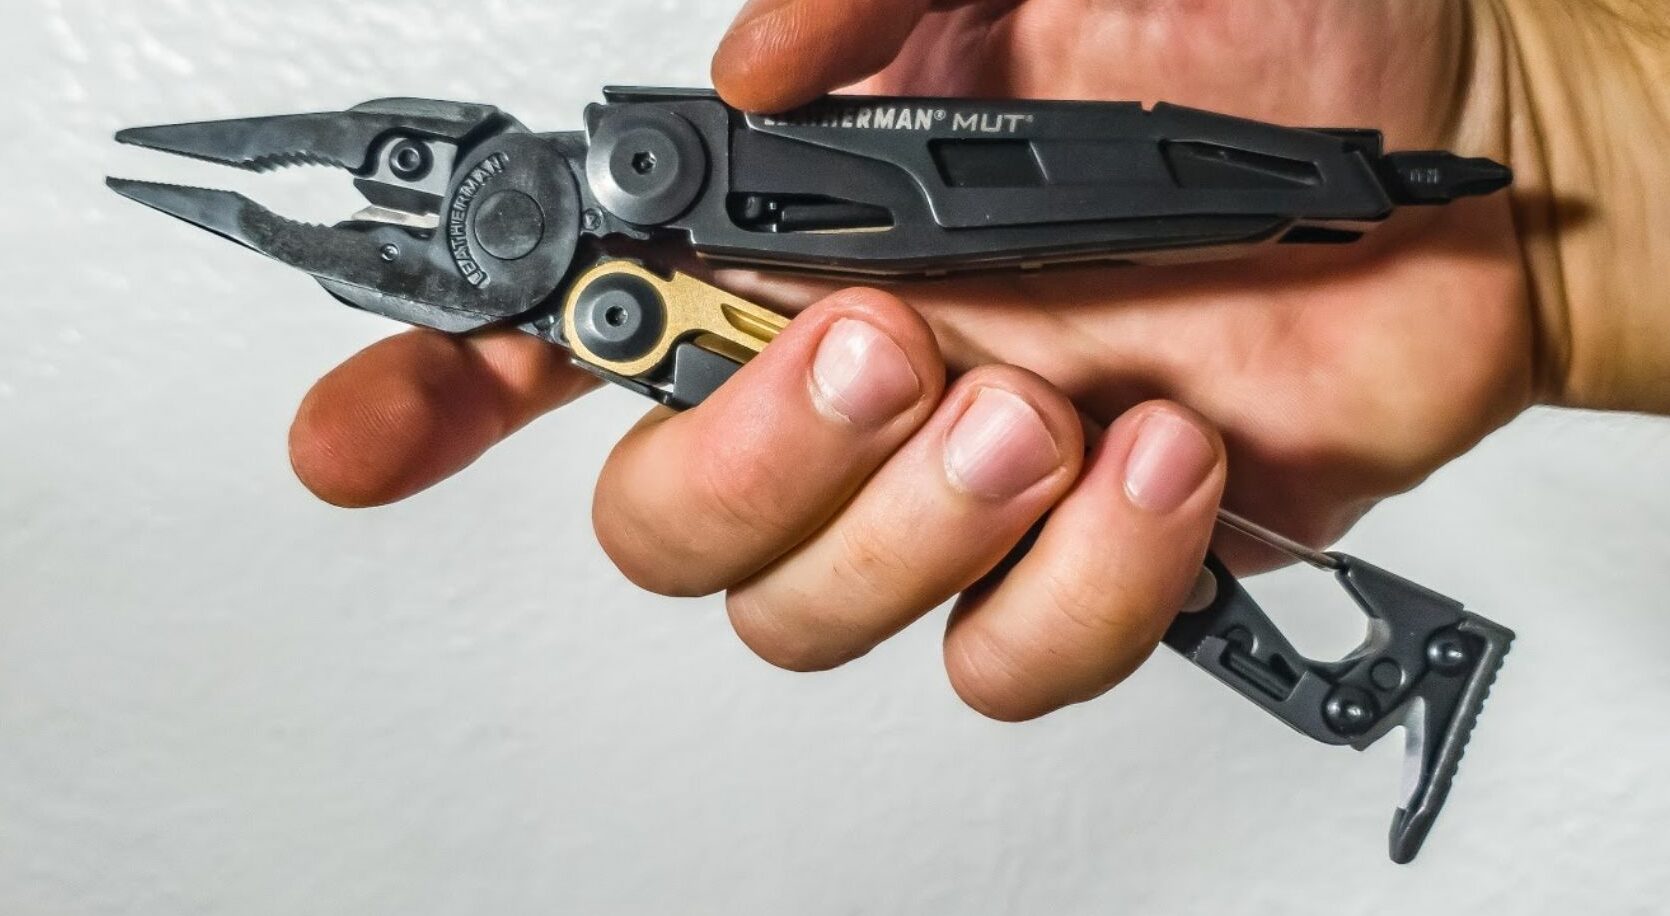 Review: the Leatherman MUT is a multitool in search of a problem